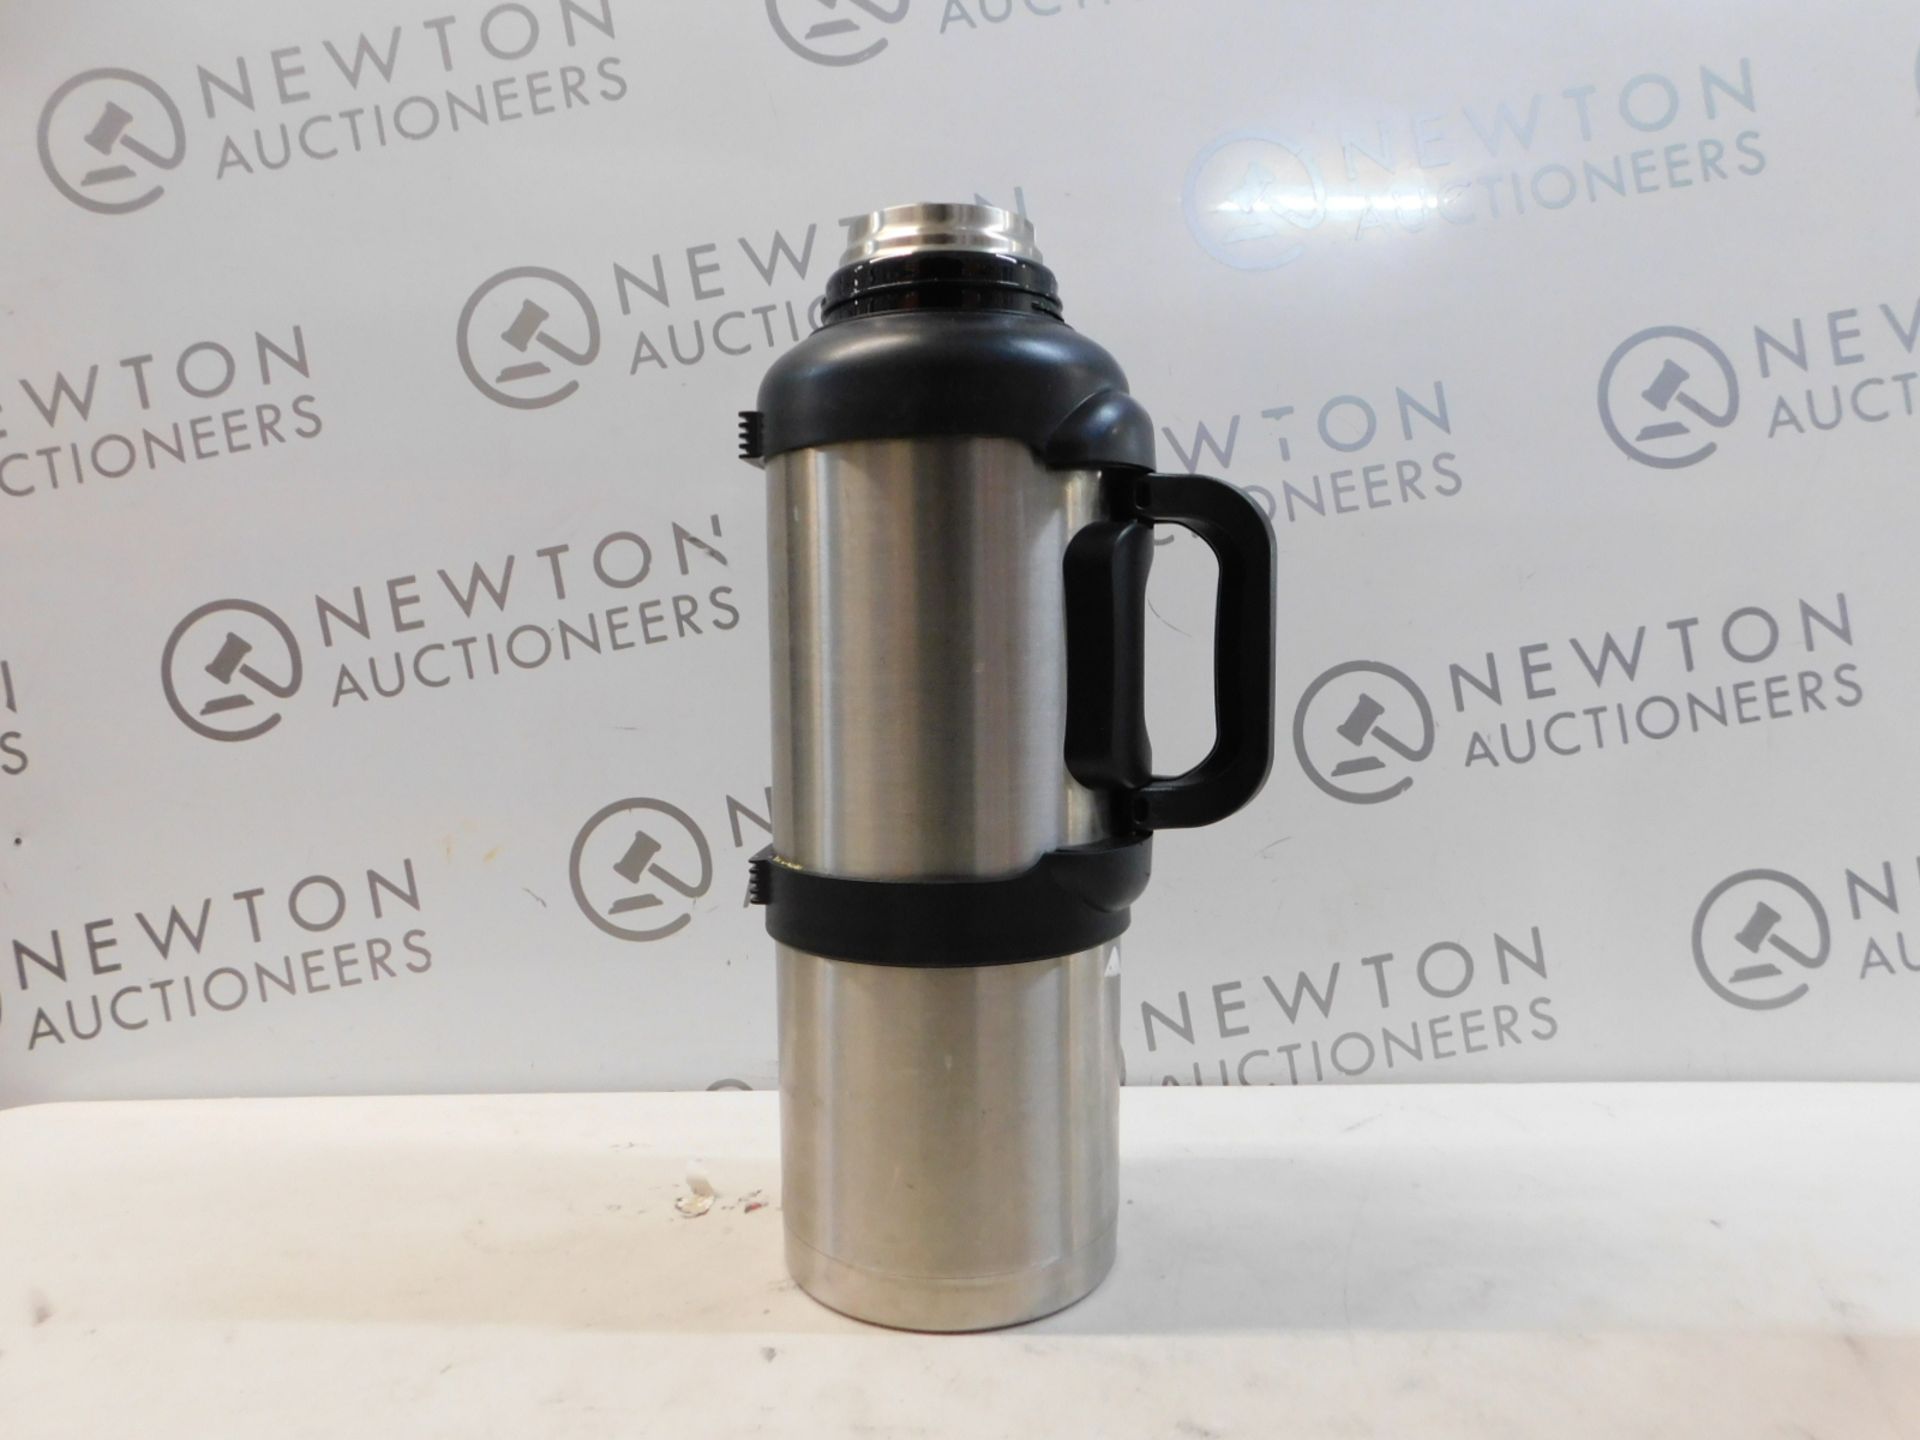 1 MANNA TITAN 4L STAINLESS STEEL 48HR VACUUM INSULATED JUG FLASK RRP Â£44.99 (NO LID)